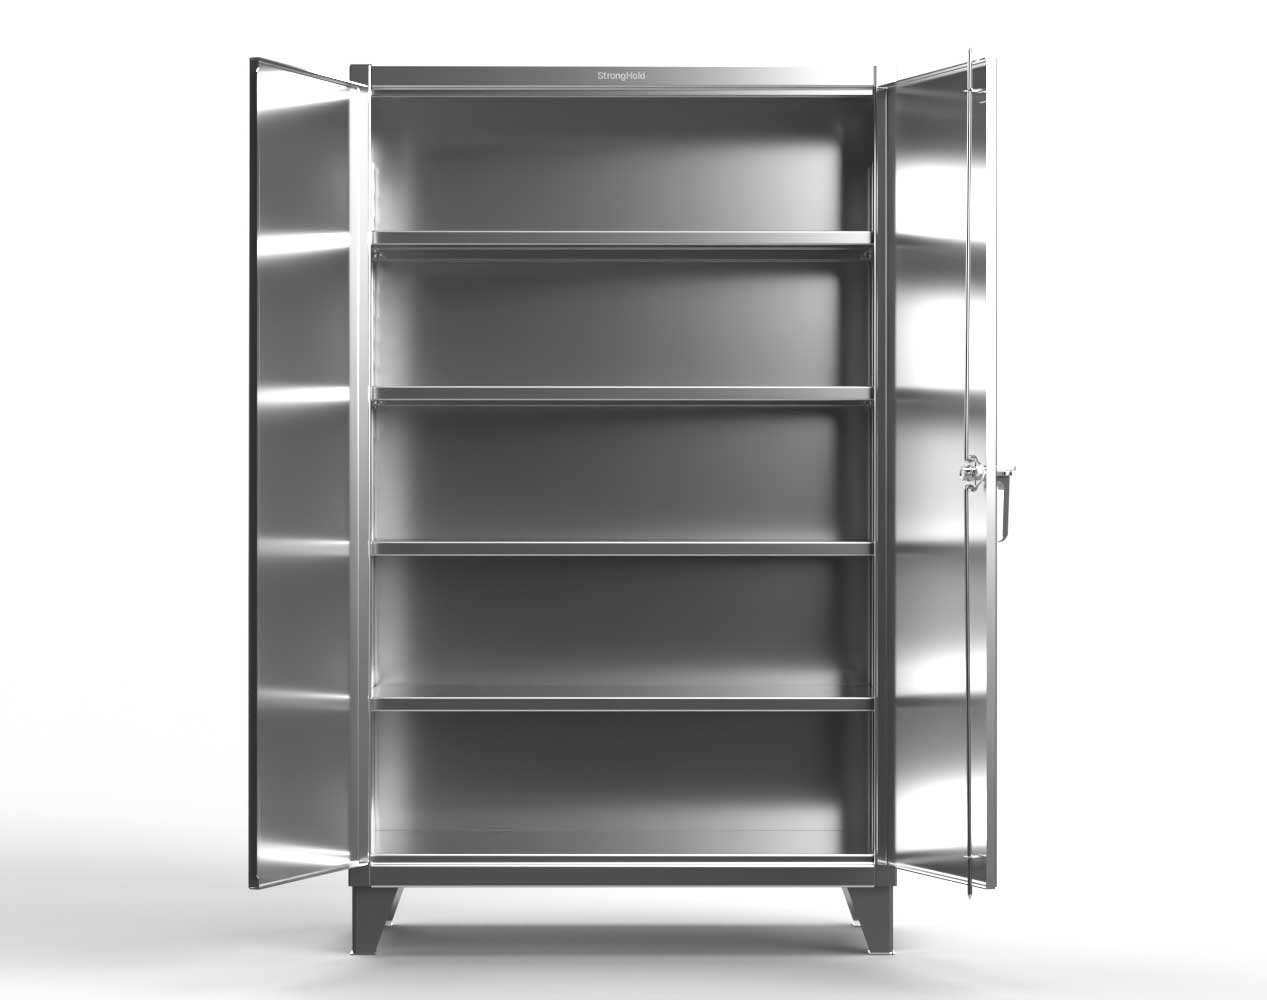 Extreme Duty 12 GA Stainless Steel Cabinet with 4 Shelves - 72 In. W x 24 In. D x 78 In. H